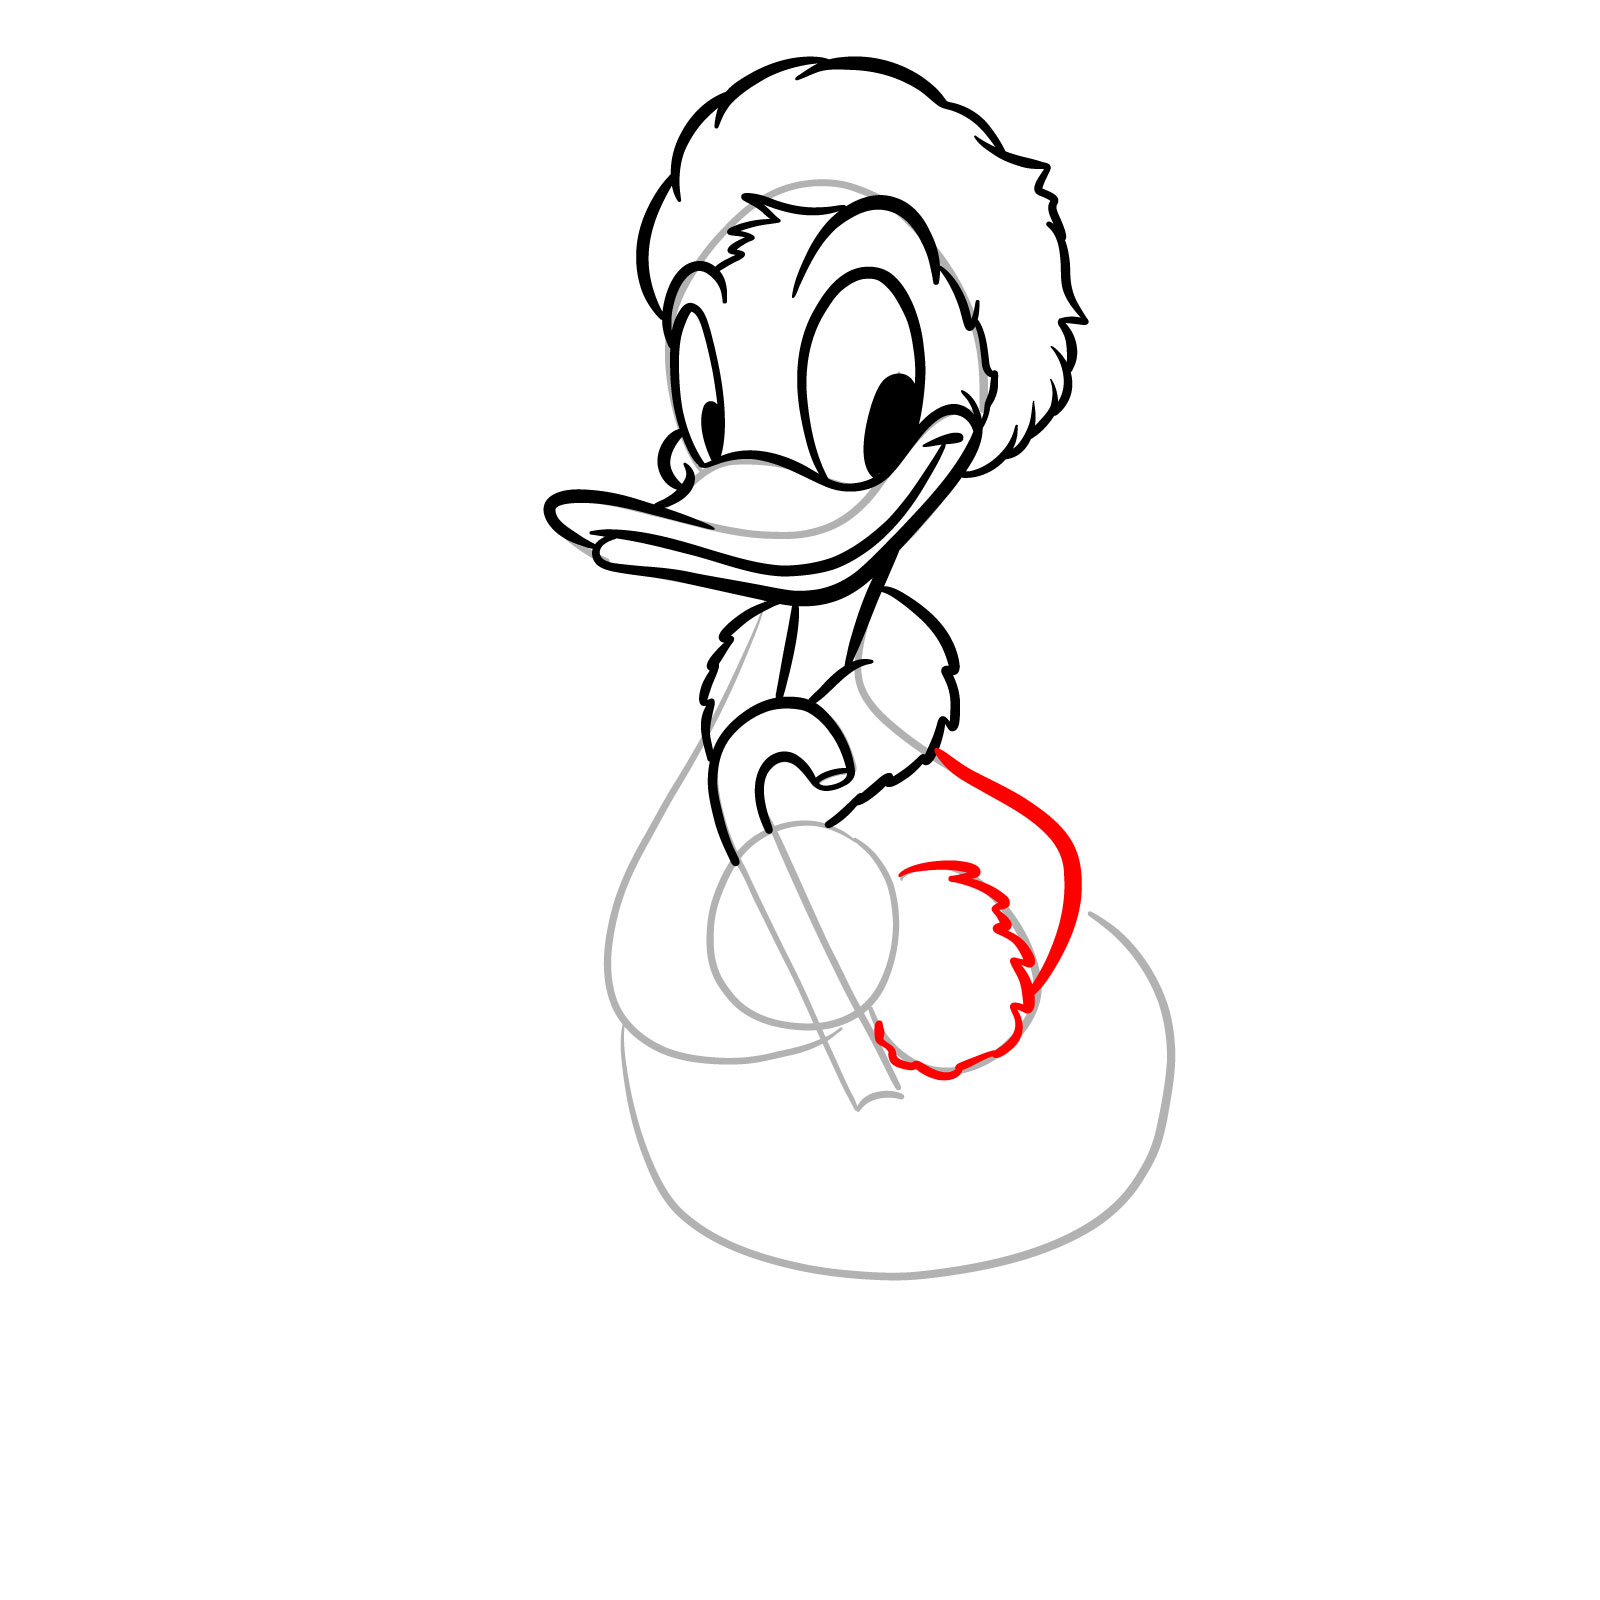 How to Draw Christmas Donald Duck - step 13